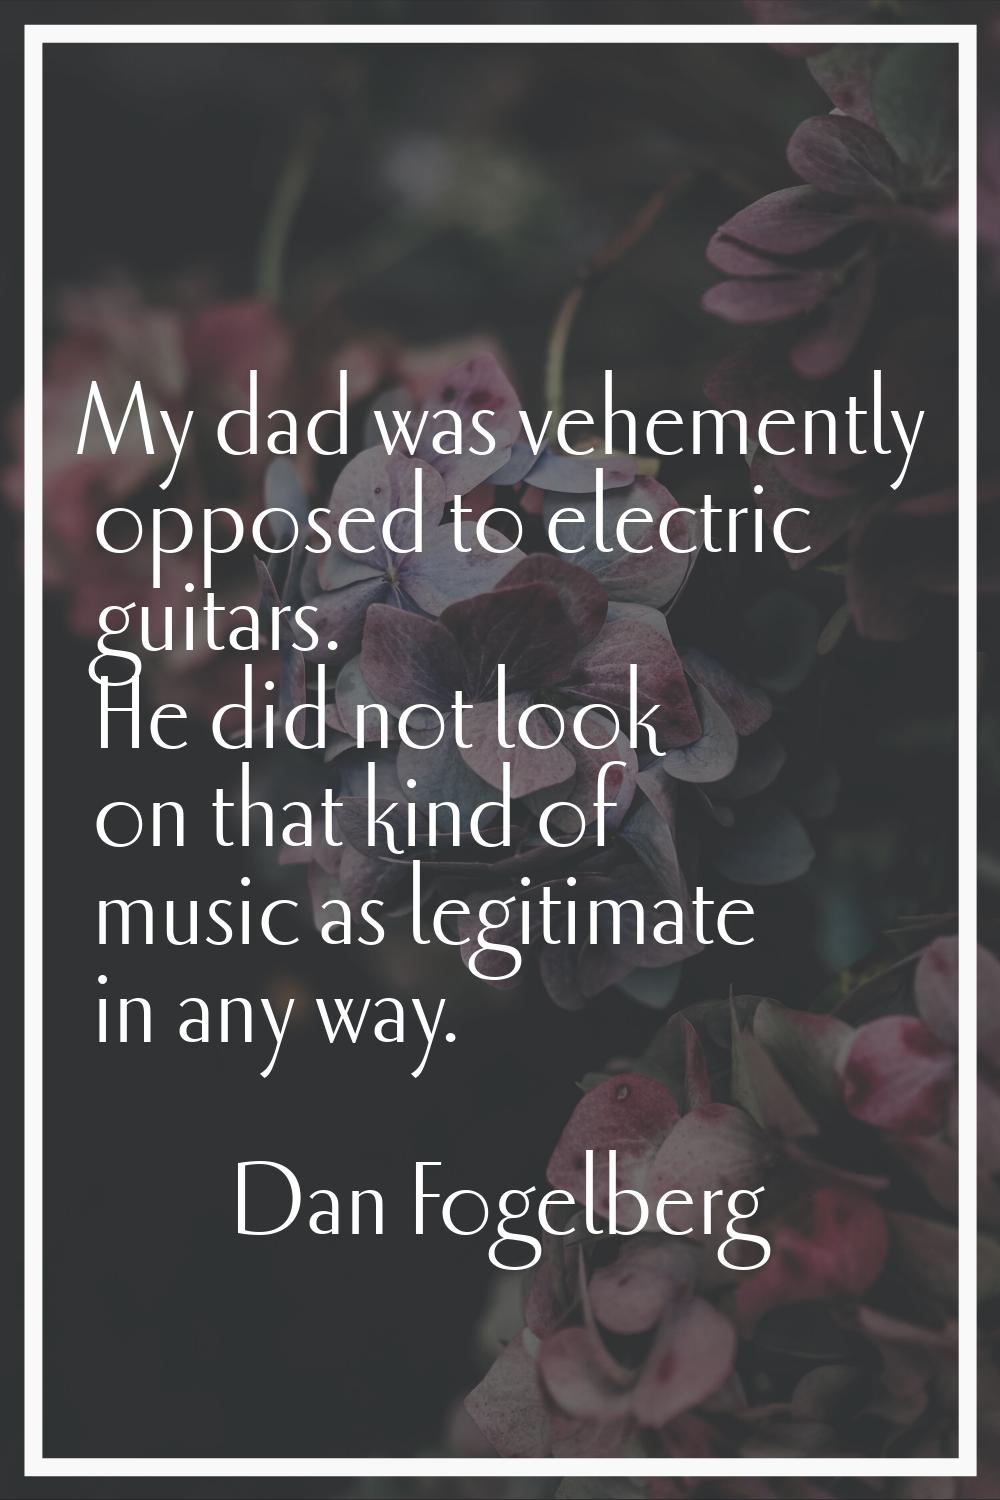 My dad was vehemently opposed to electric guitars. He did not look on that kind of music as legitim